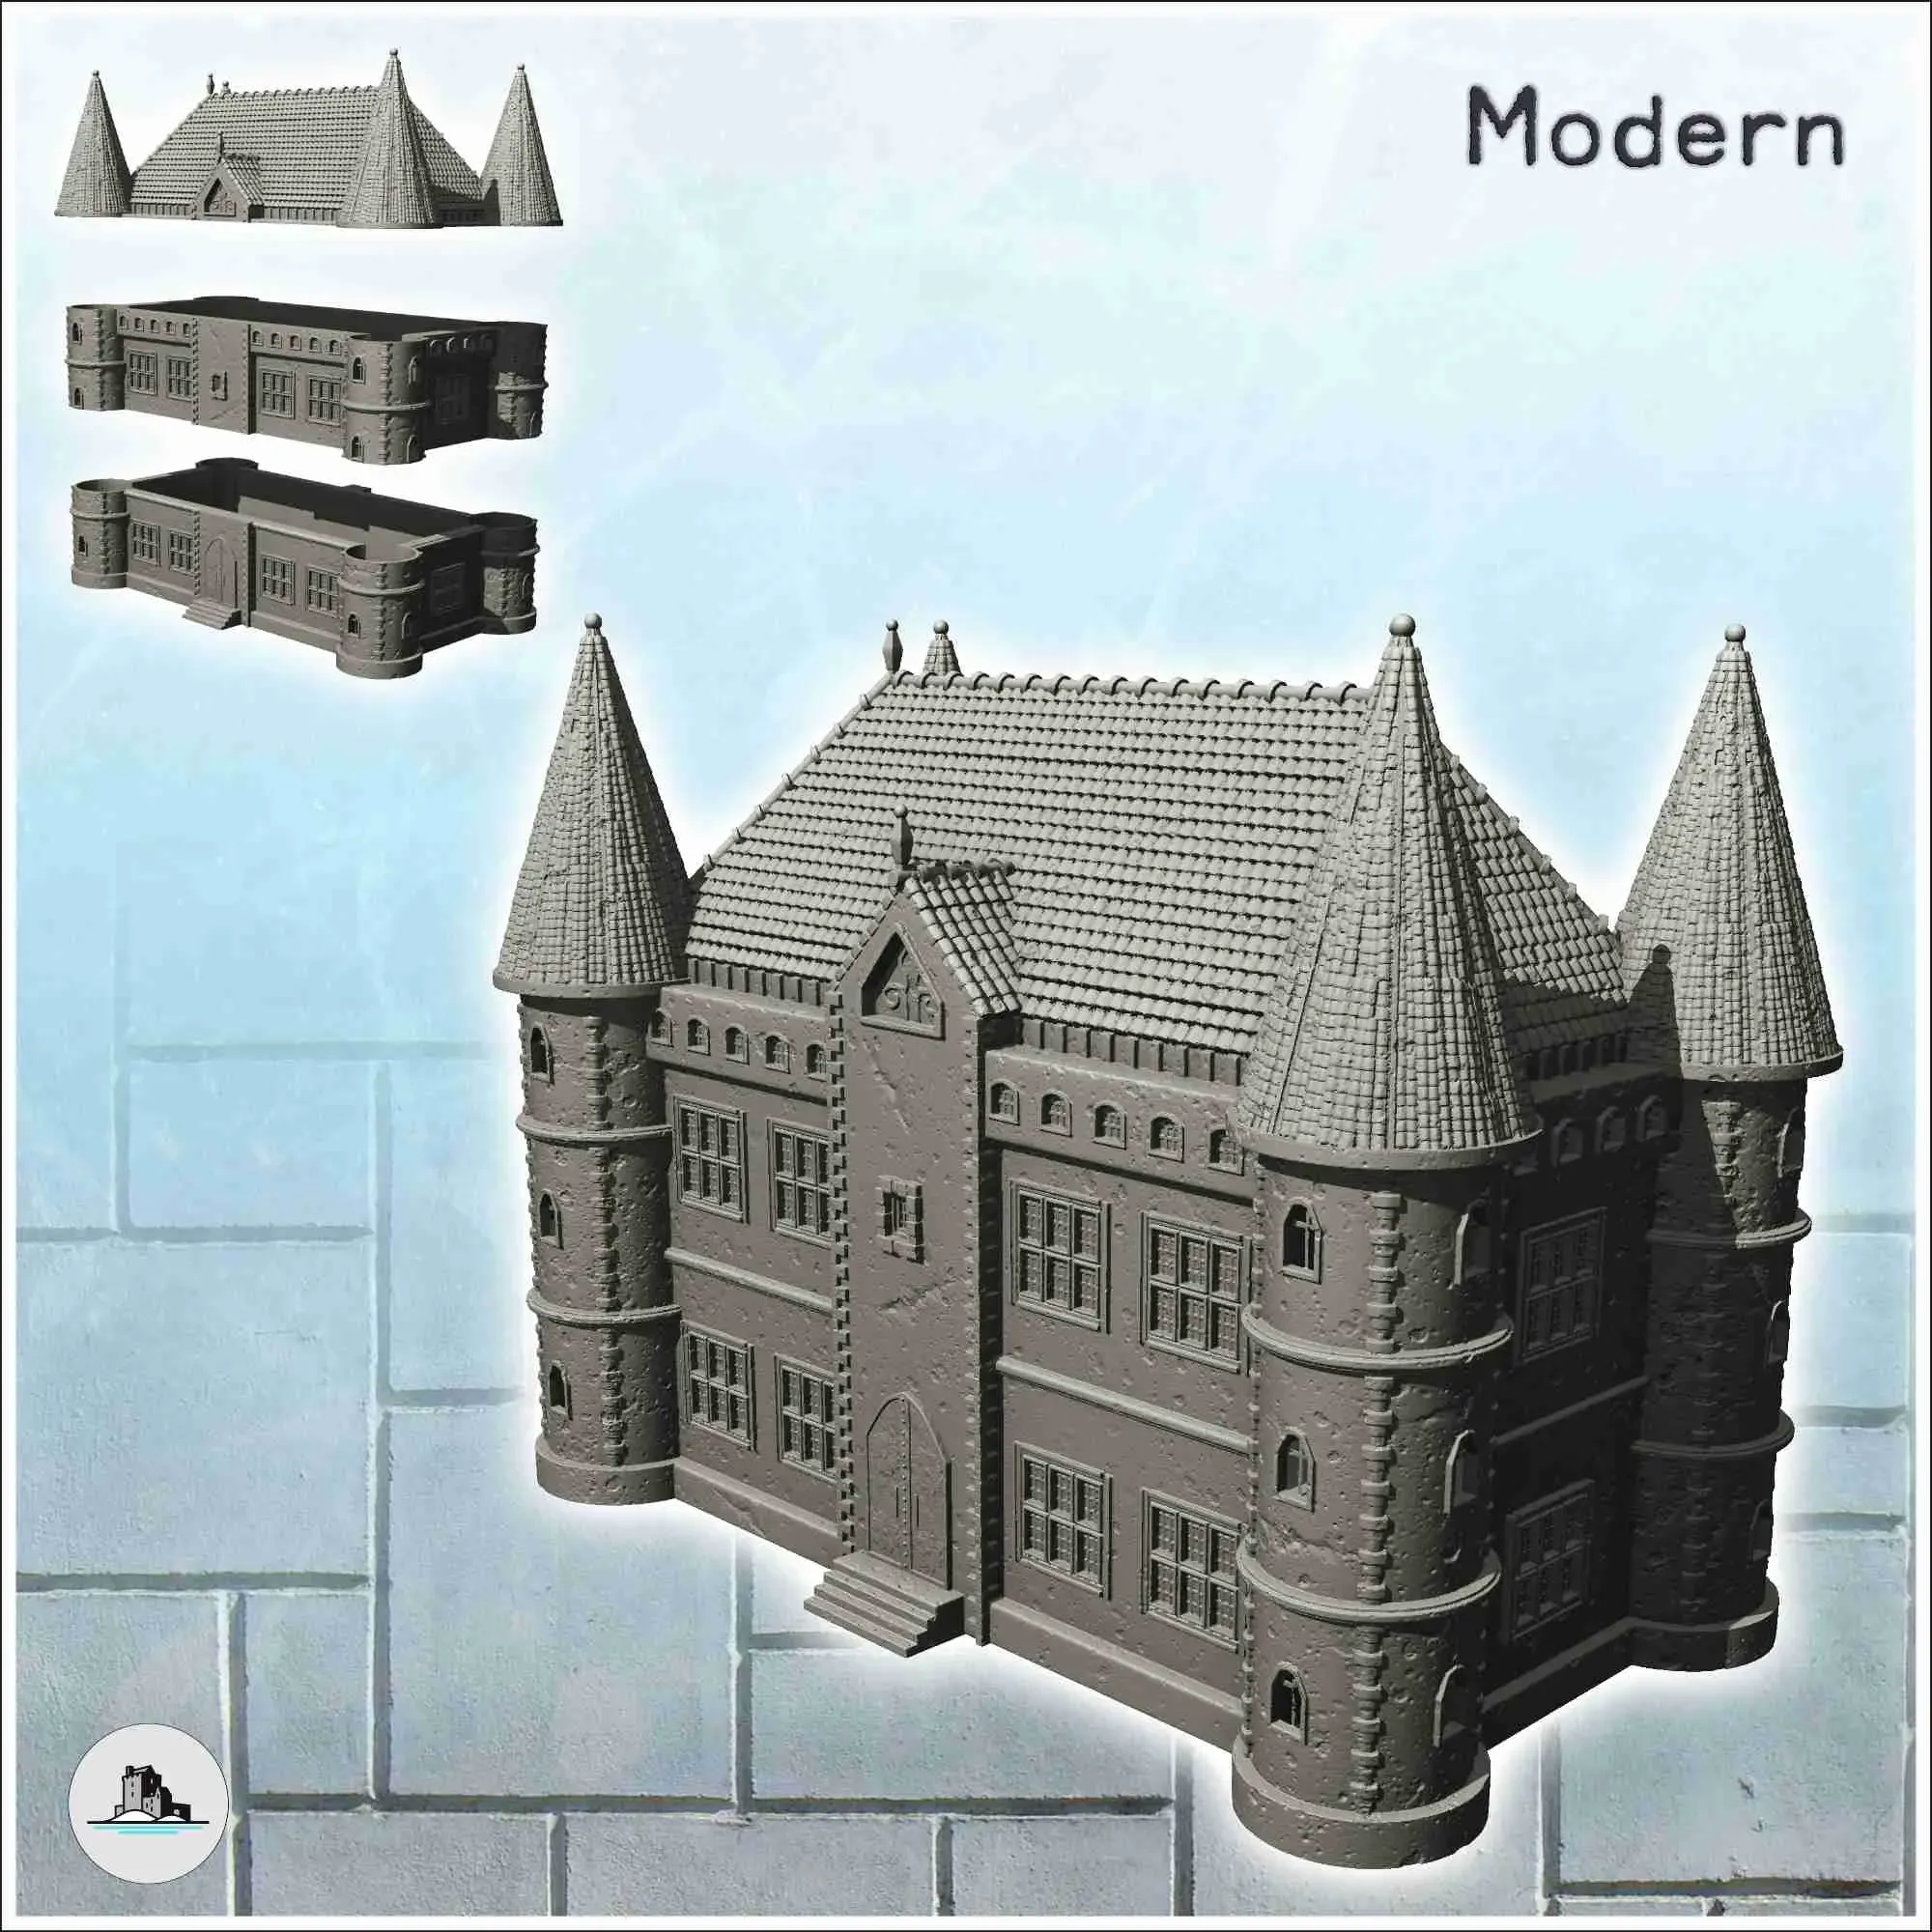 Large modern castle with quadruple corner towers and central